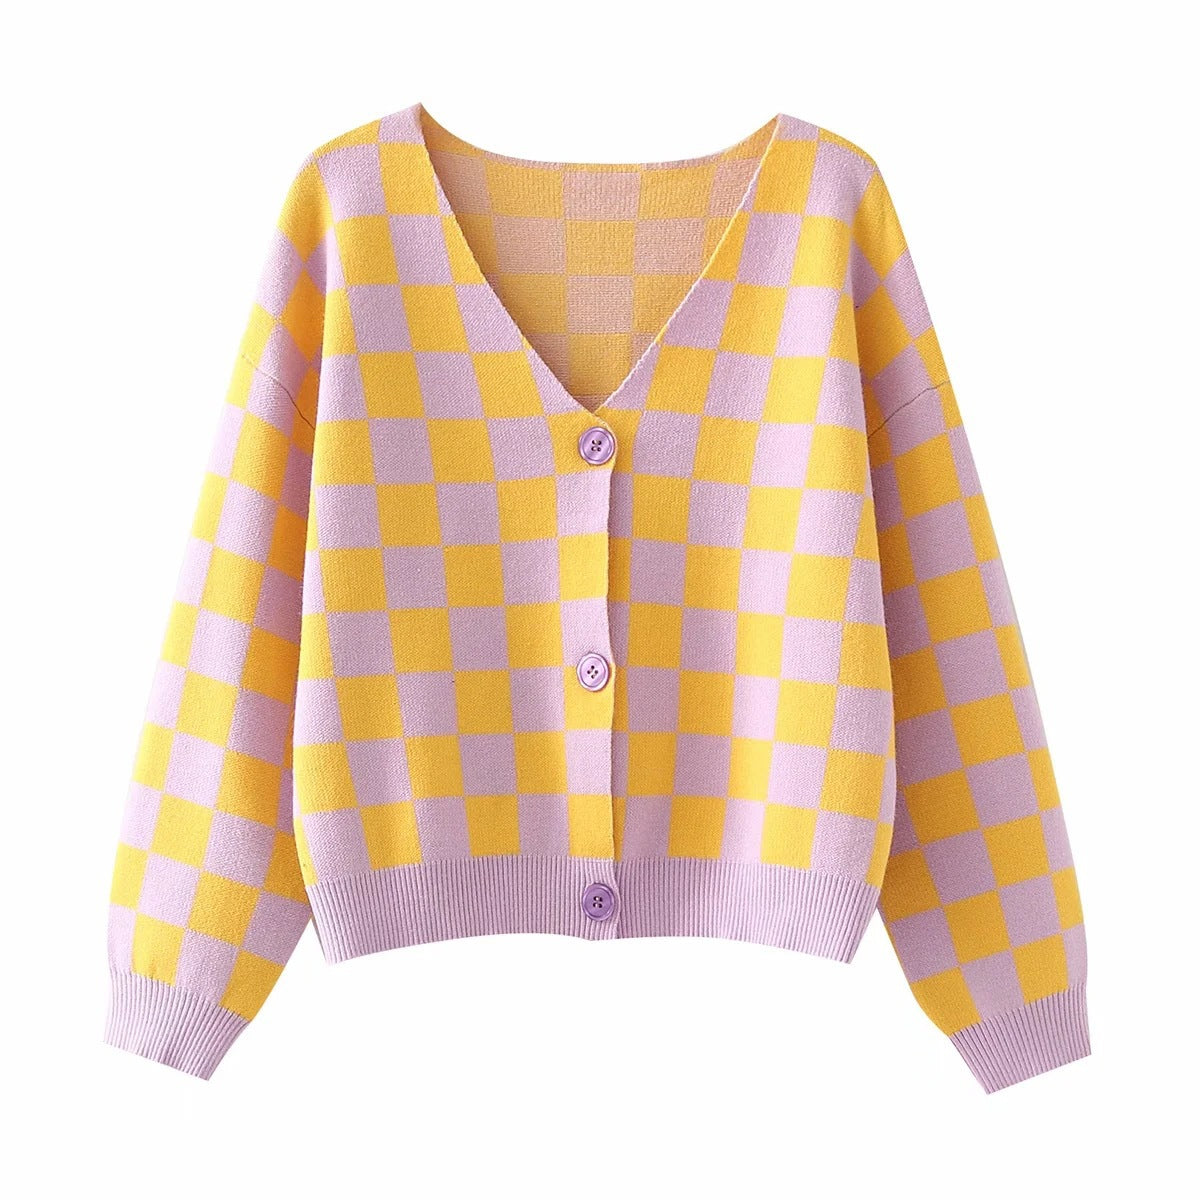 Yellow and Lavender Cardigan